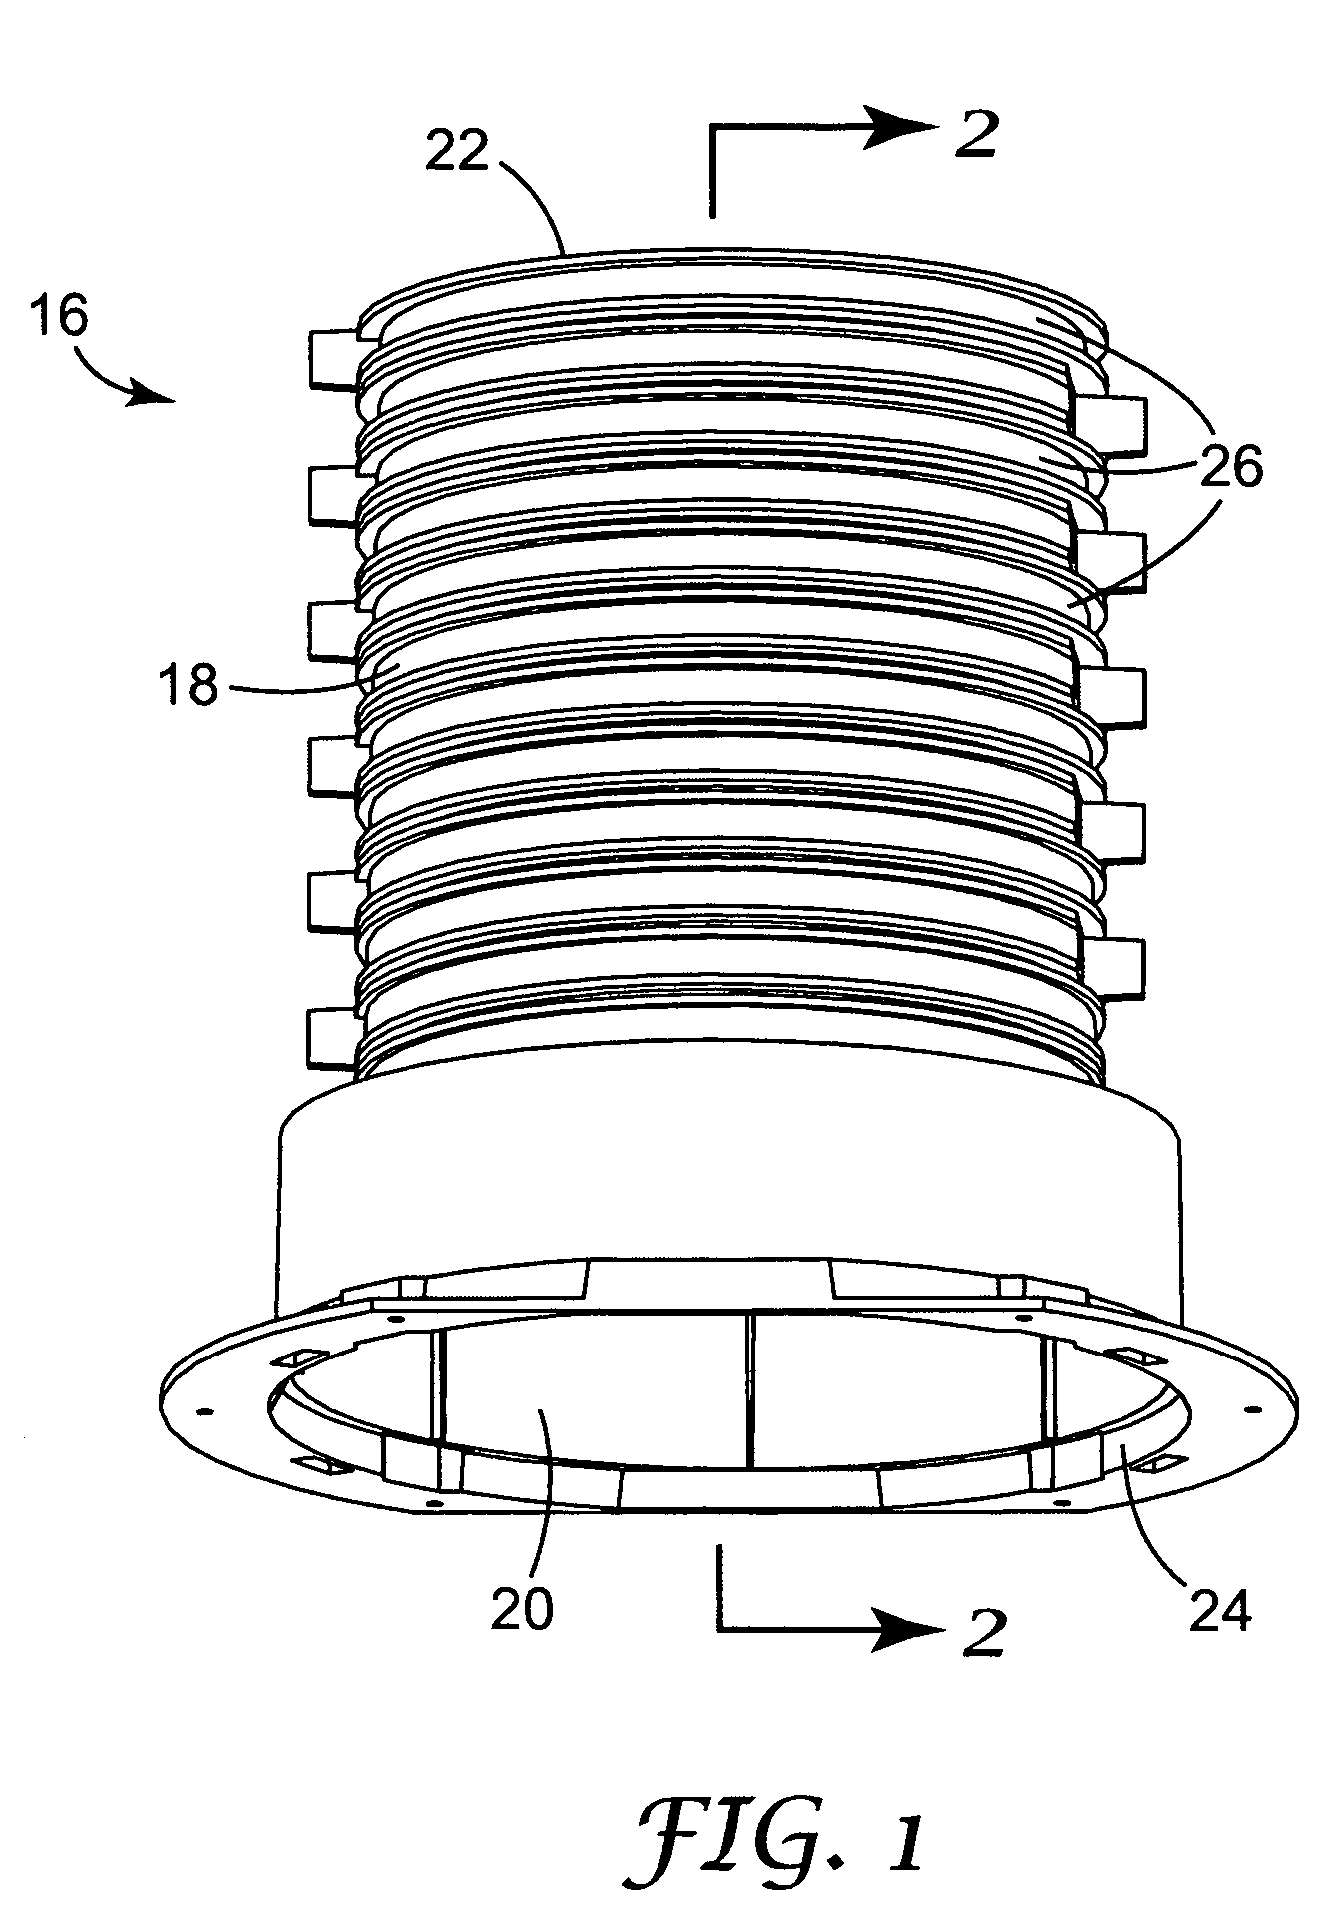 Apparatus and method for placement of a water closet fitting